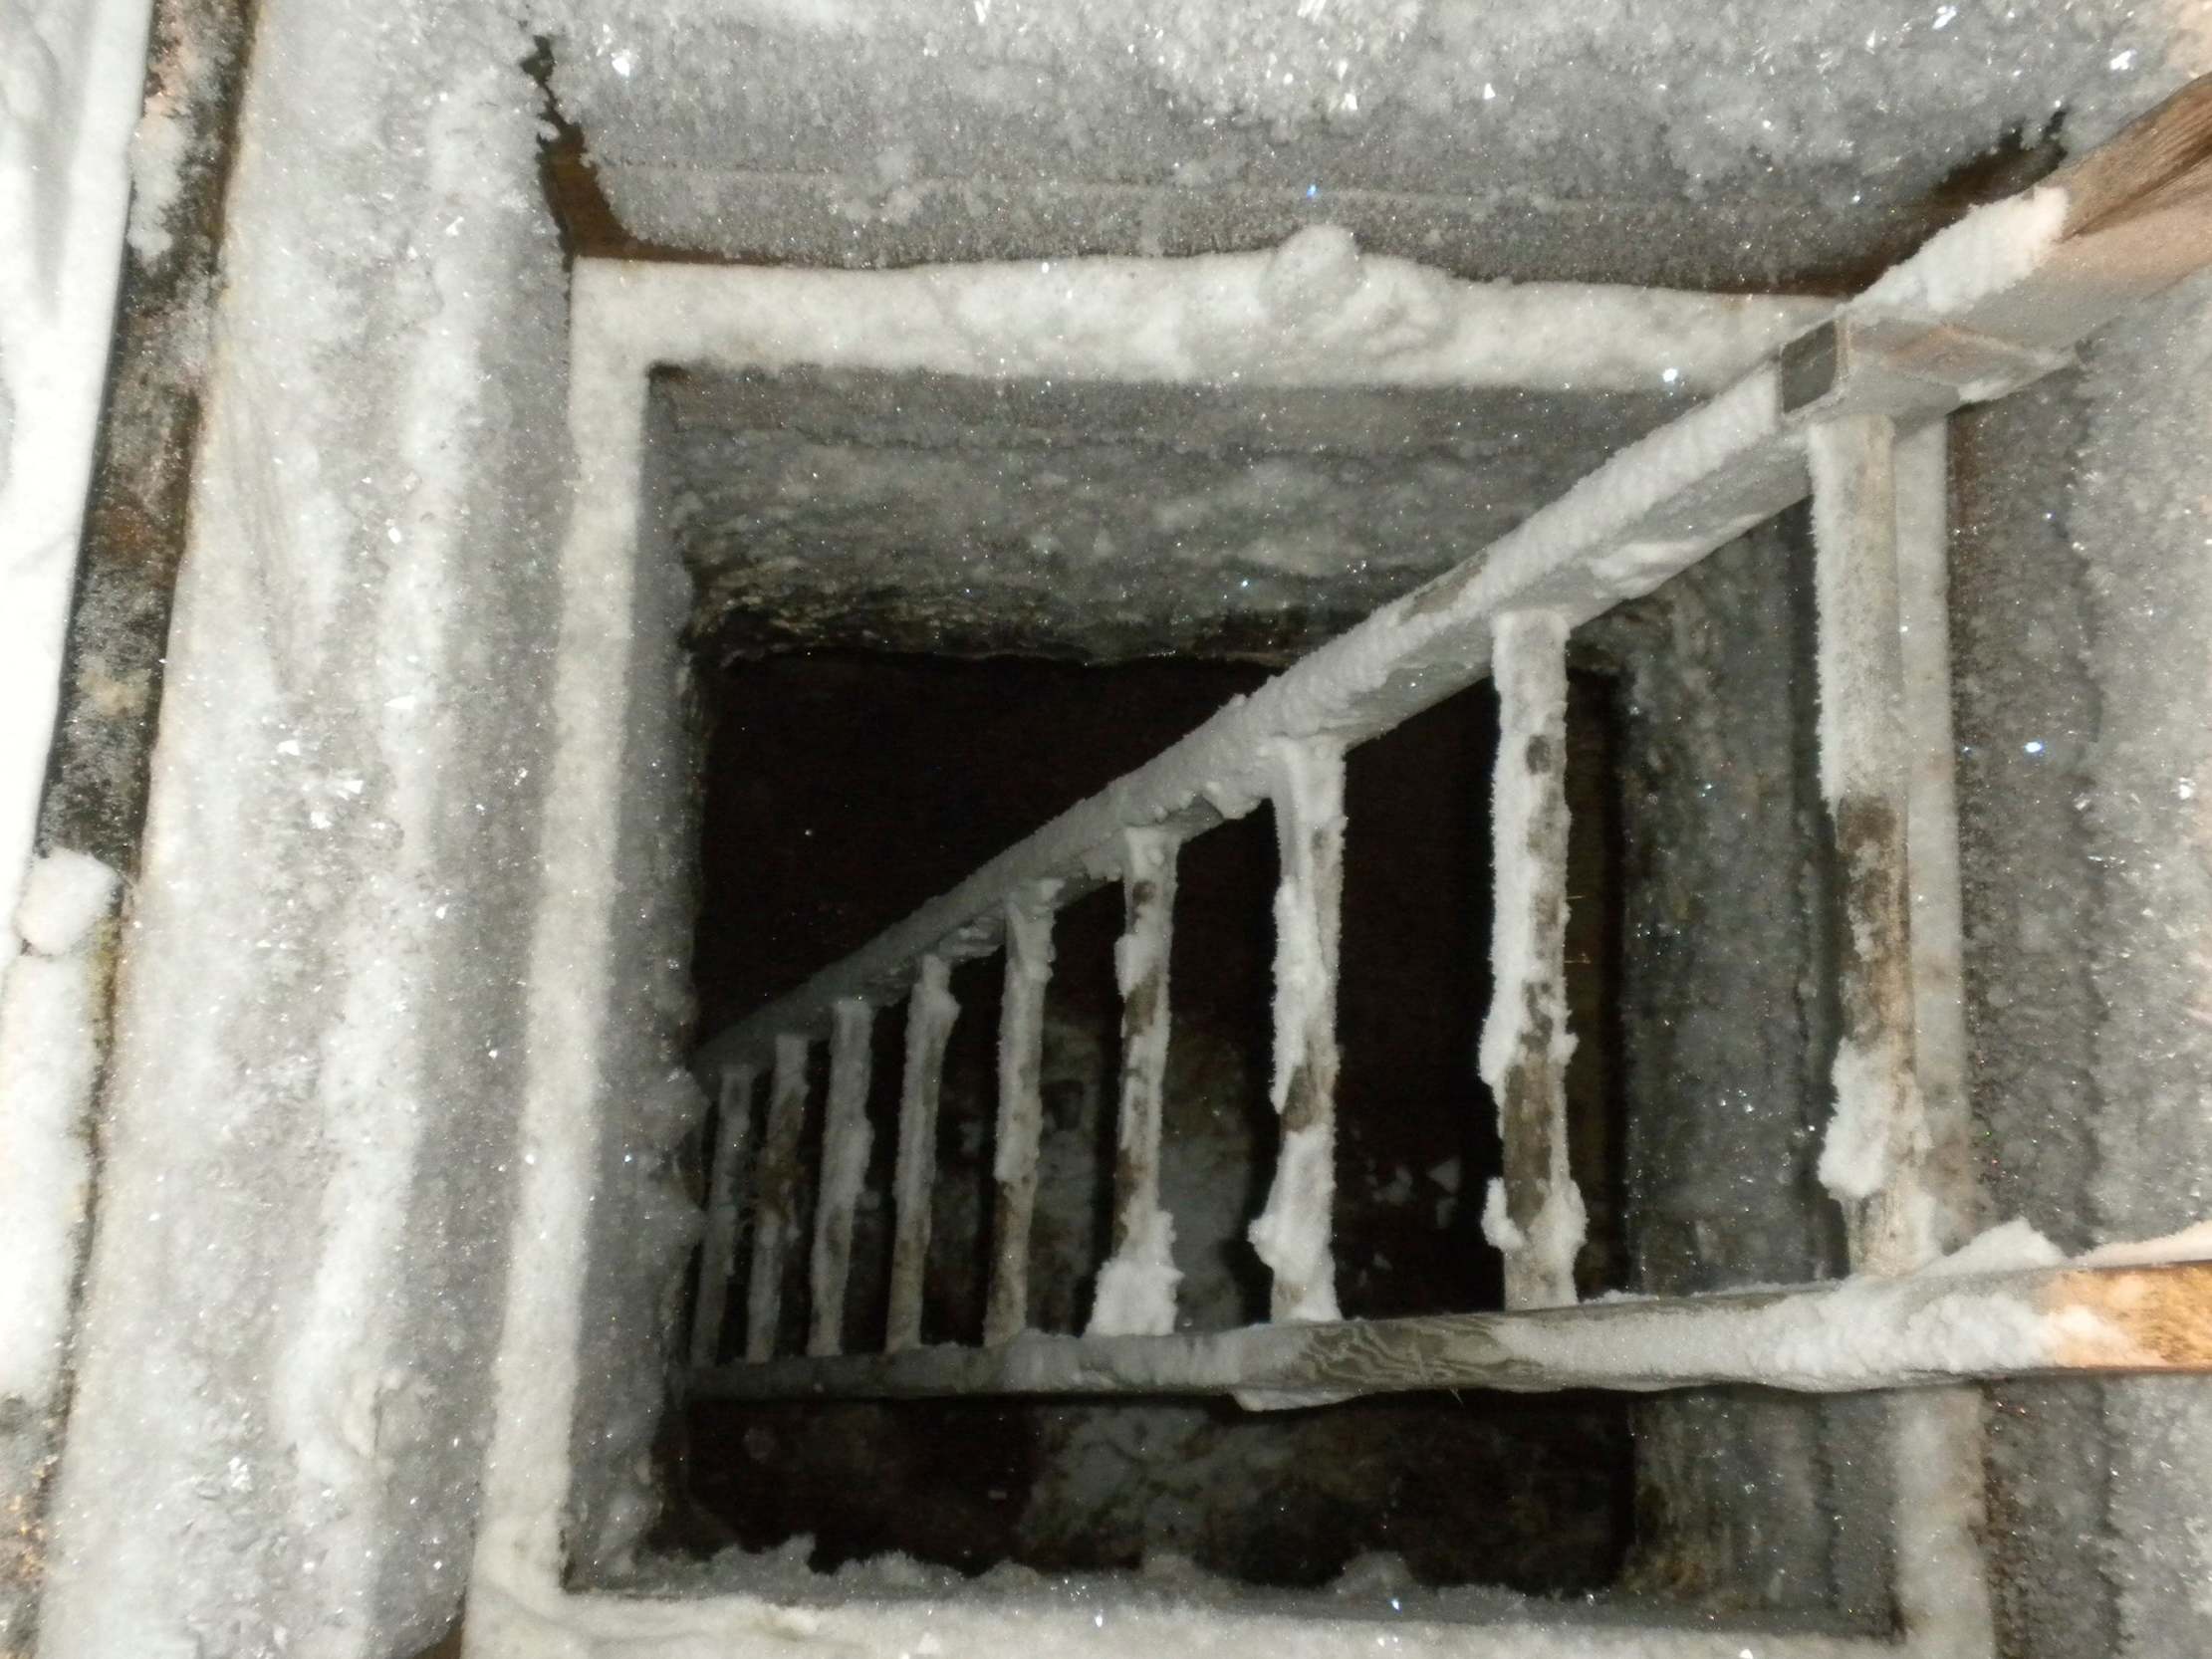 ‘I’m worried’: Alaska’s ice cellars melting due to climate change after being used to store food for generations - The Independent